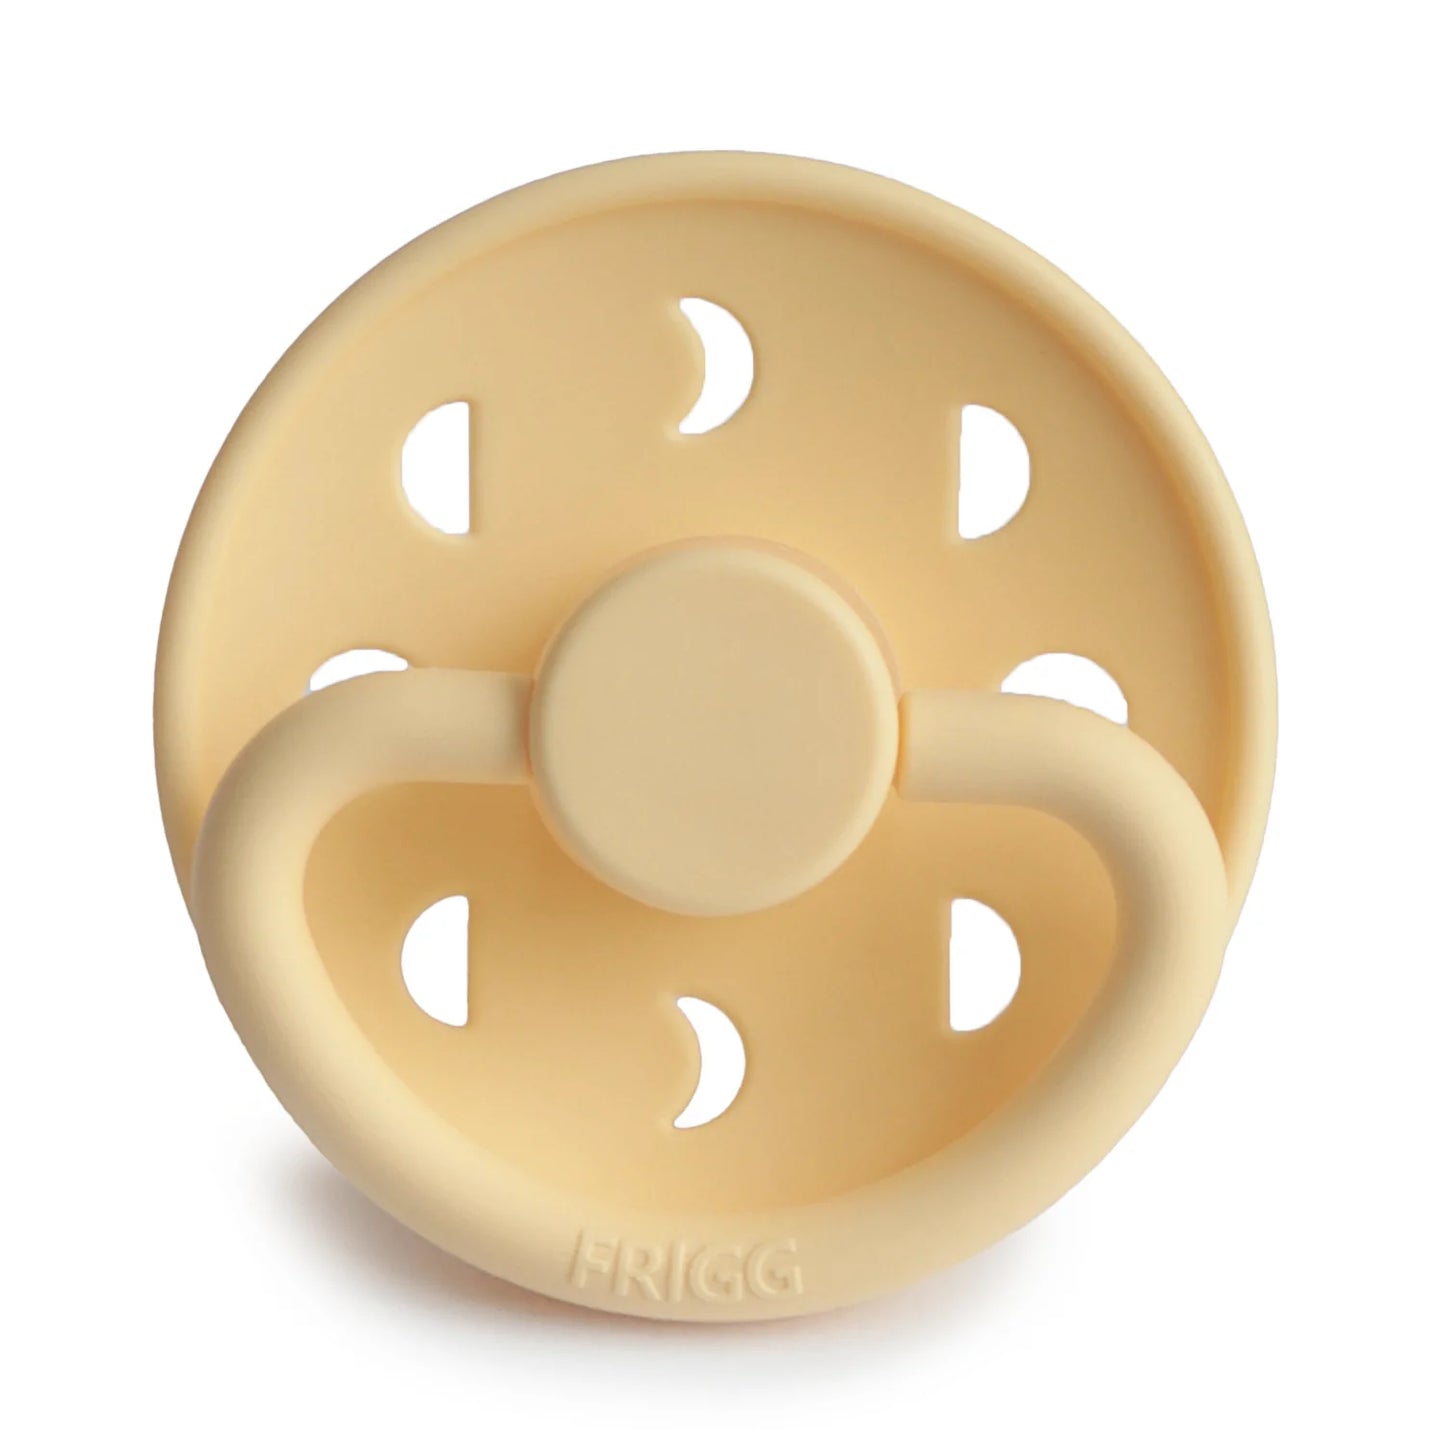 Frigg Pacifier - Moon Phase - Pale Daffodil - Silicone Size 2